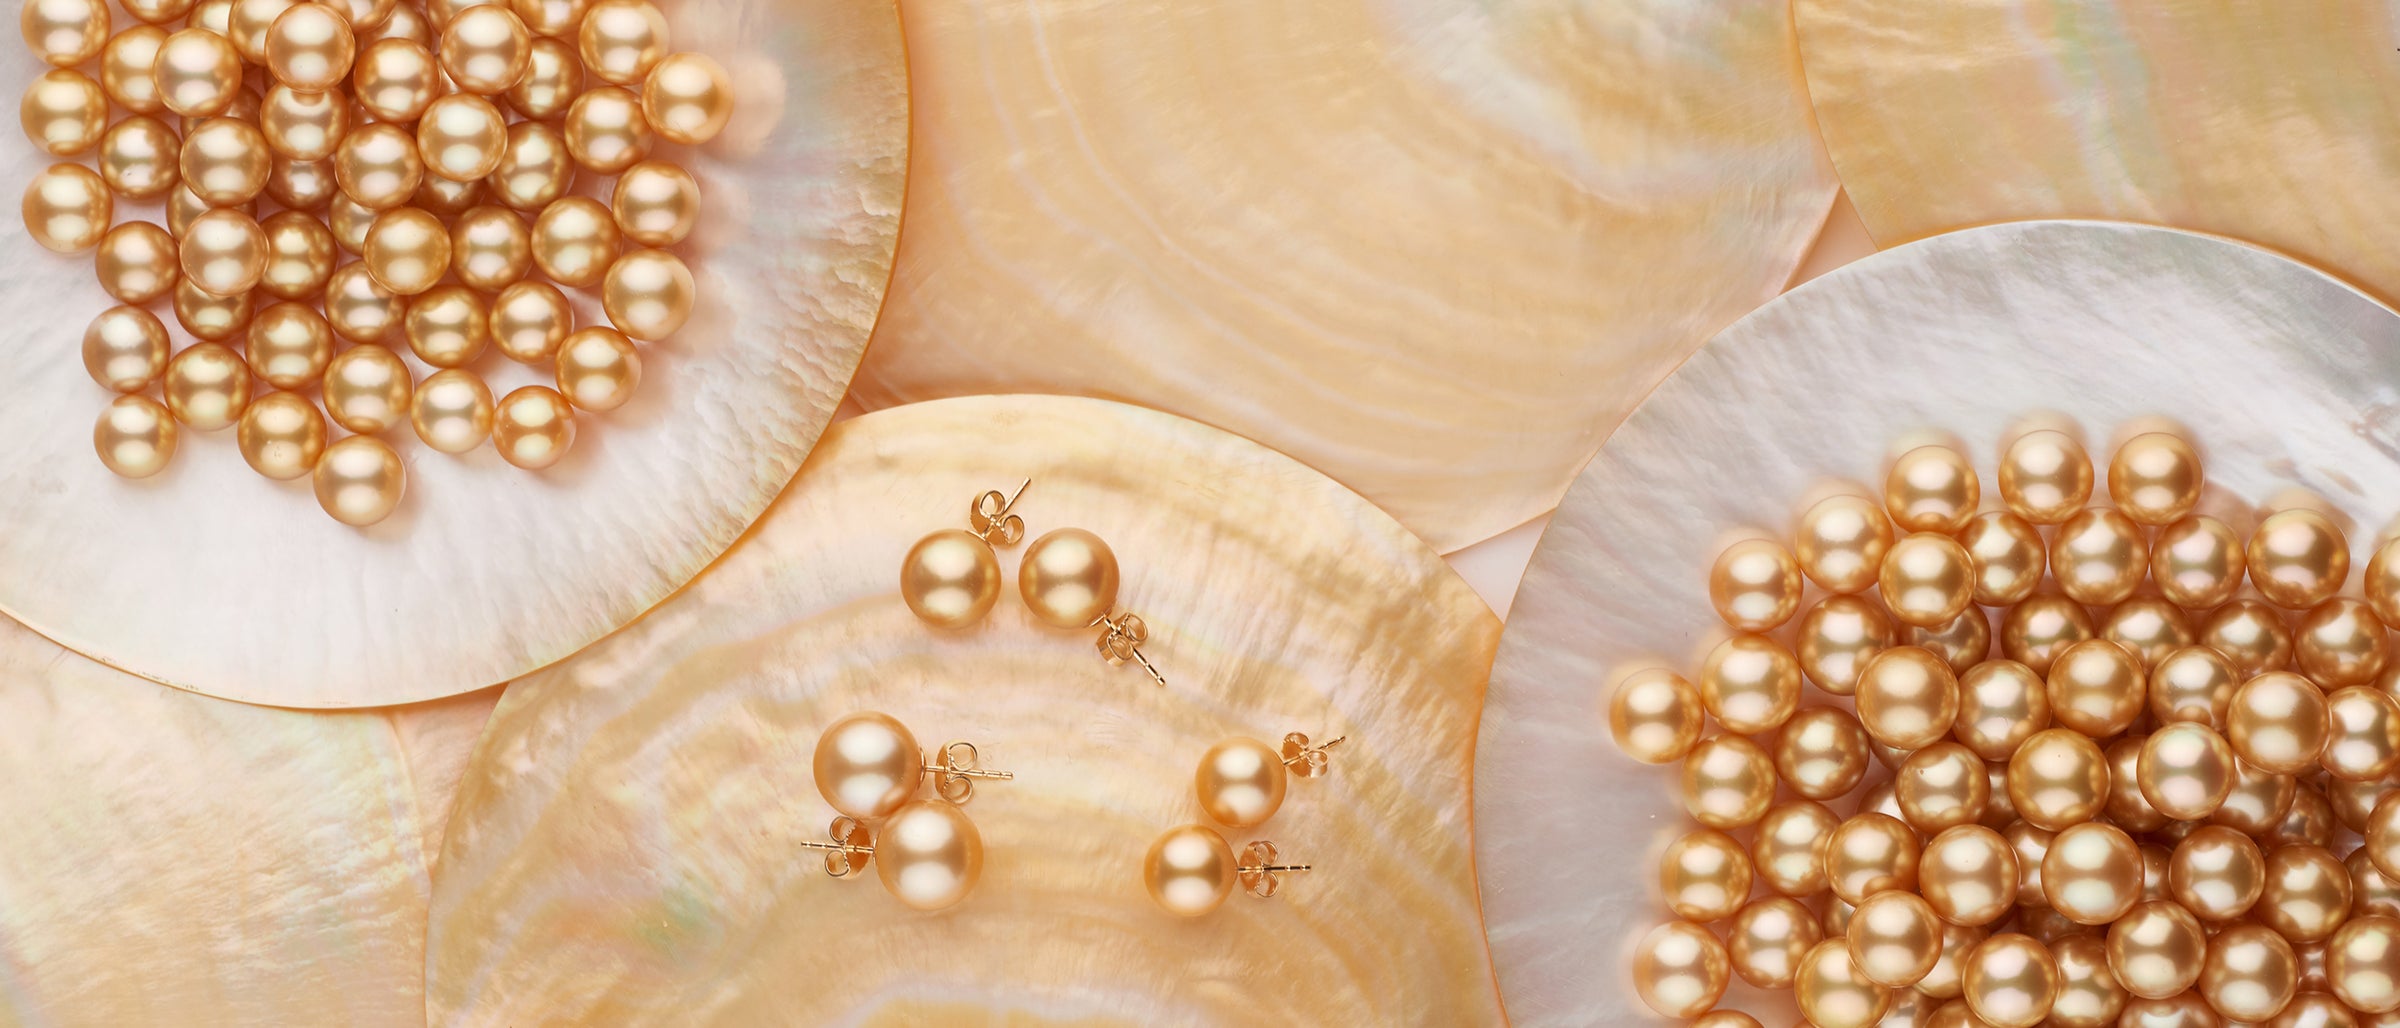 Golden South Sea loose pearls in gold-lip pearl oyster shells